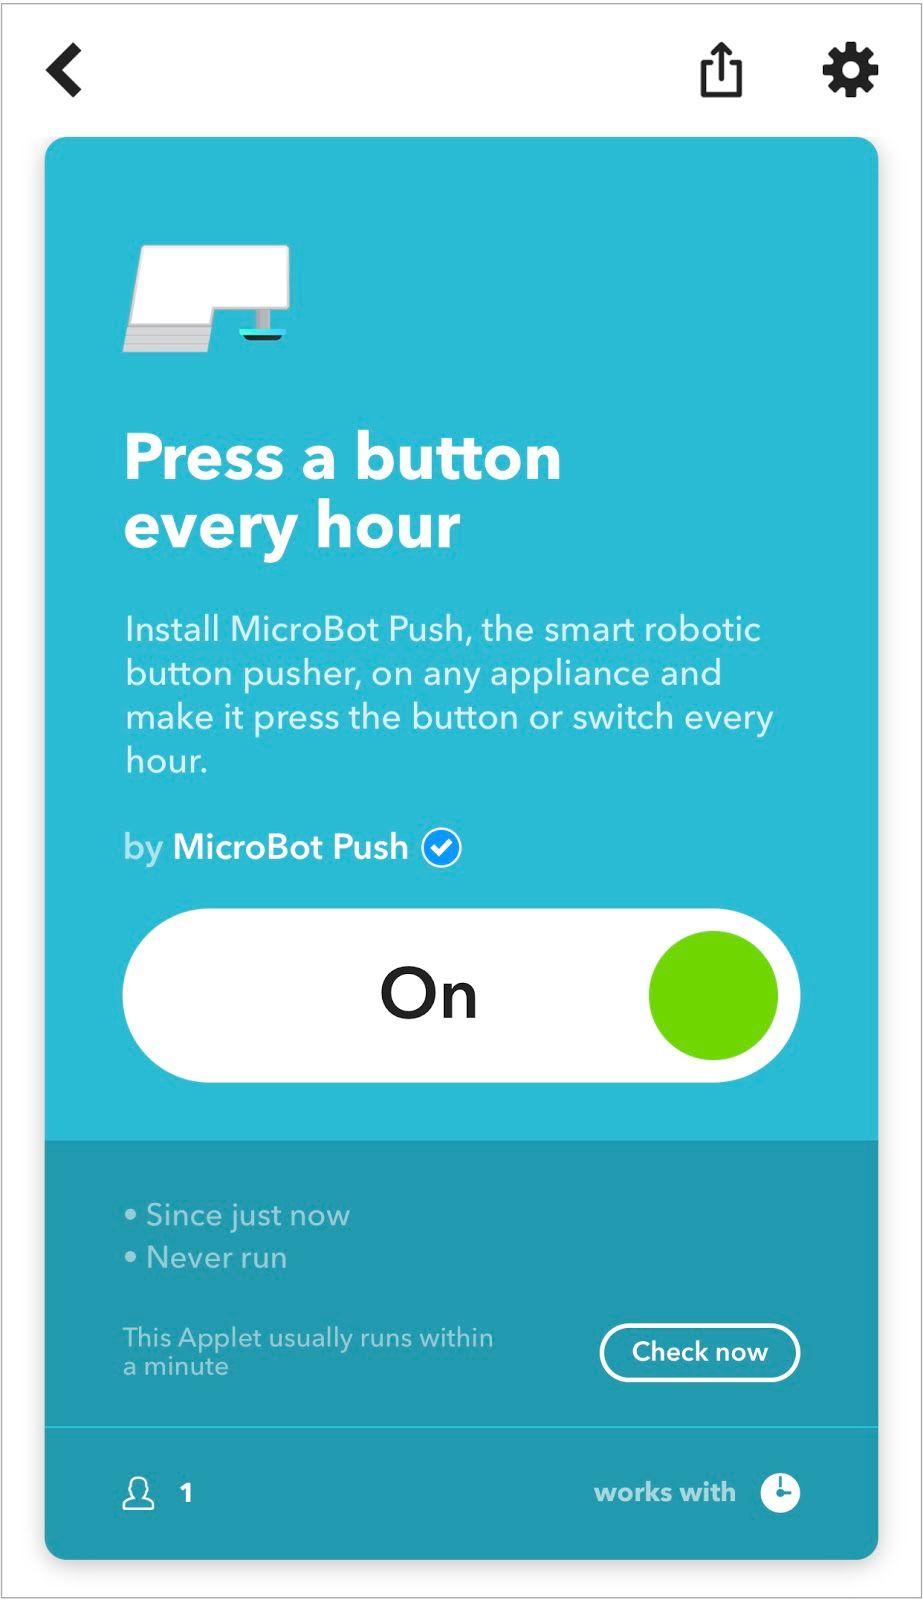 MicroBot Push. Use a predefined applet.